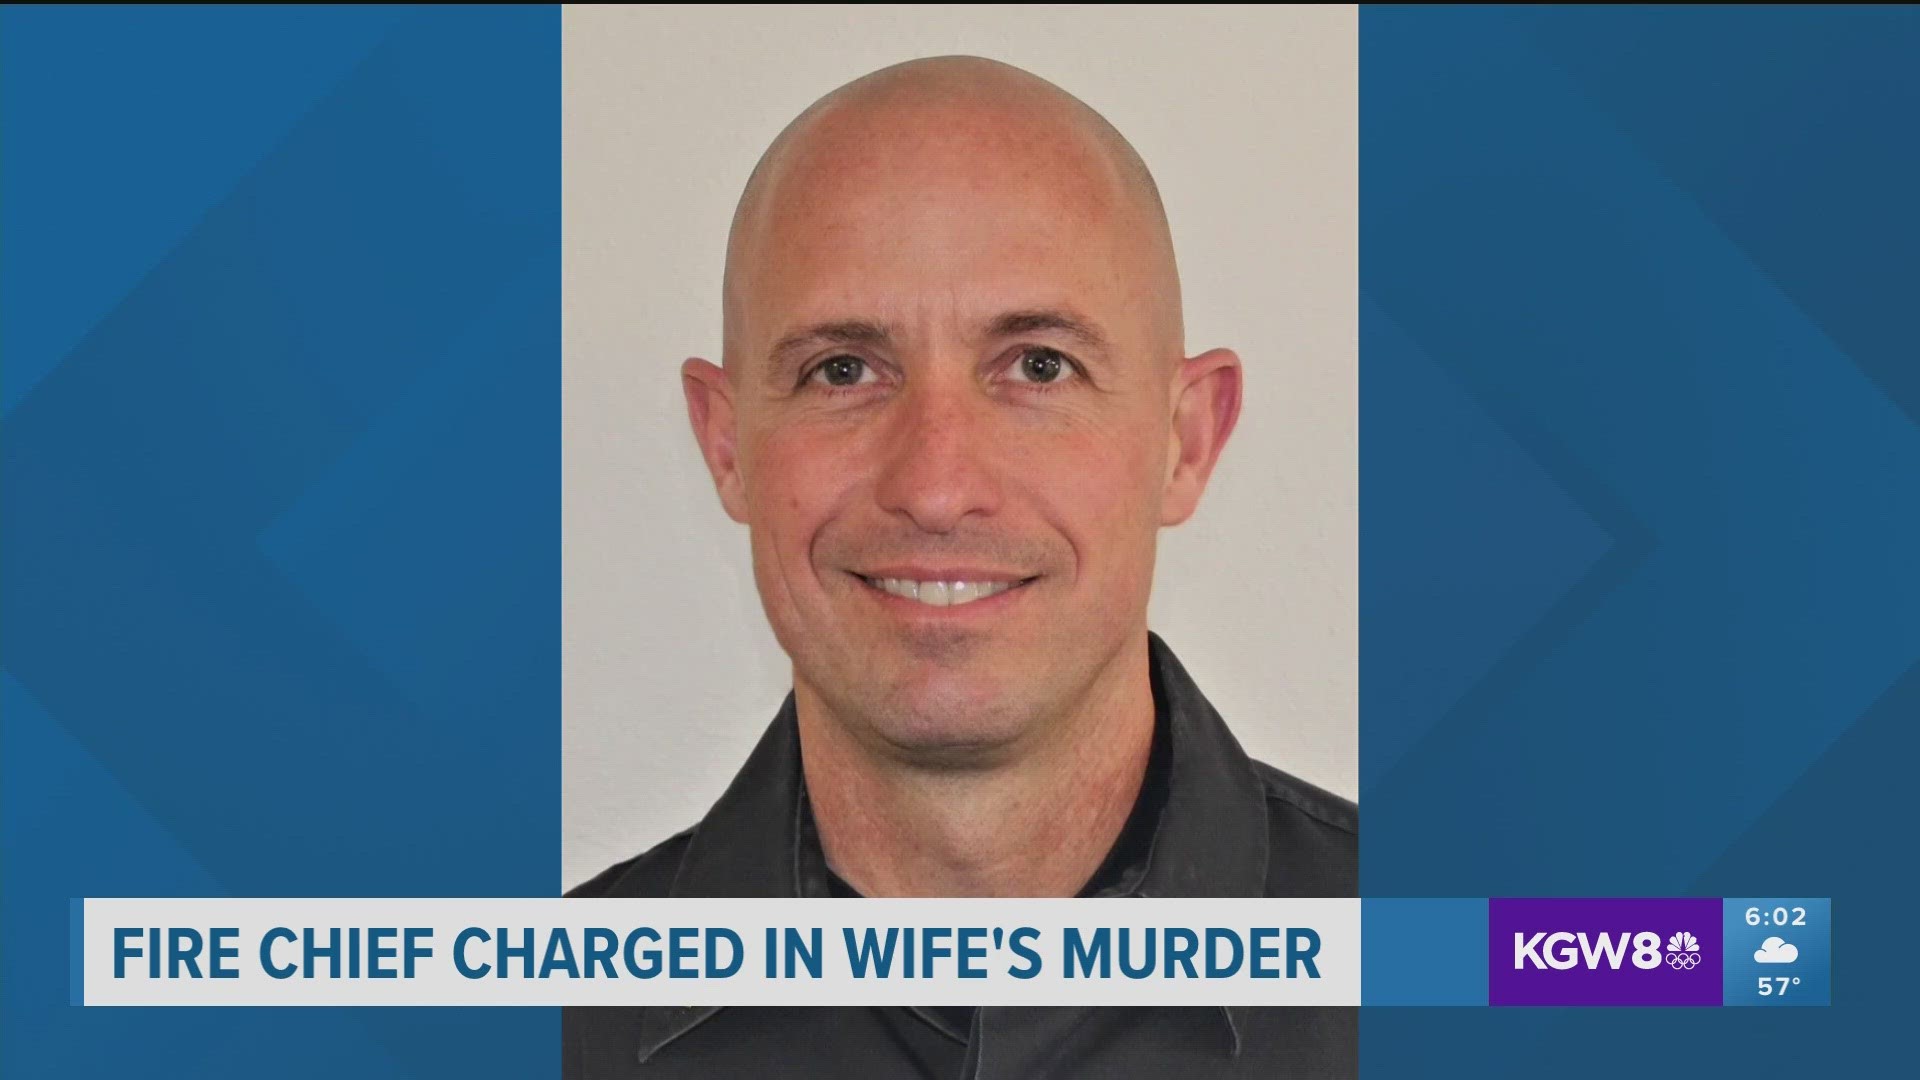 Kevin West of the Camas-Washougal Fire Department is accused of killing his wife, Marcy West, on Jan. 8.